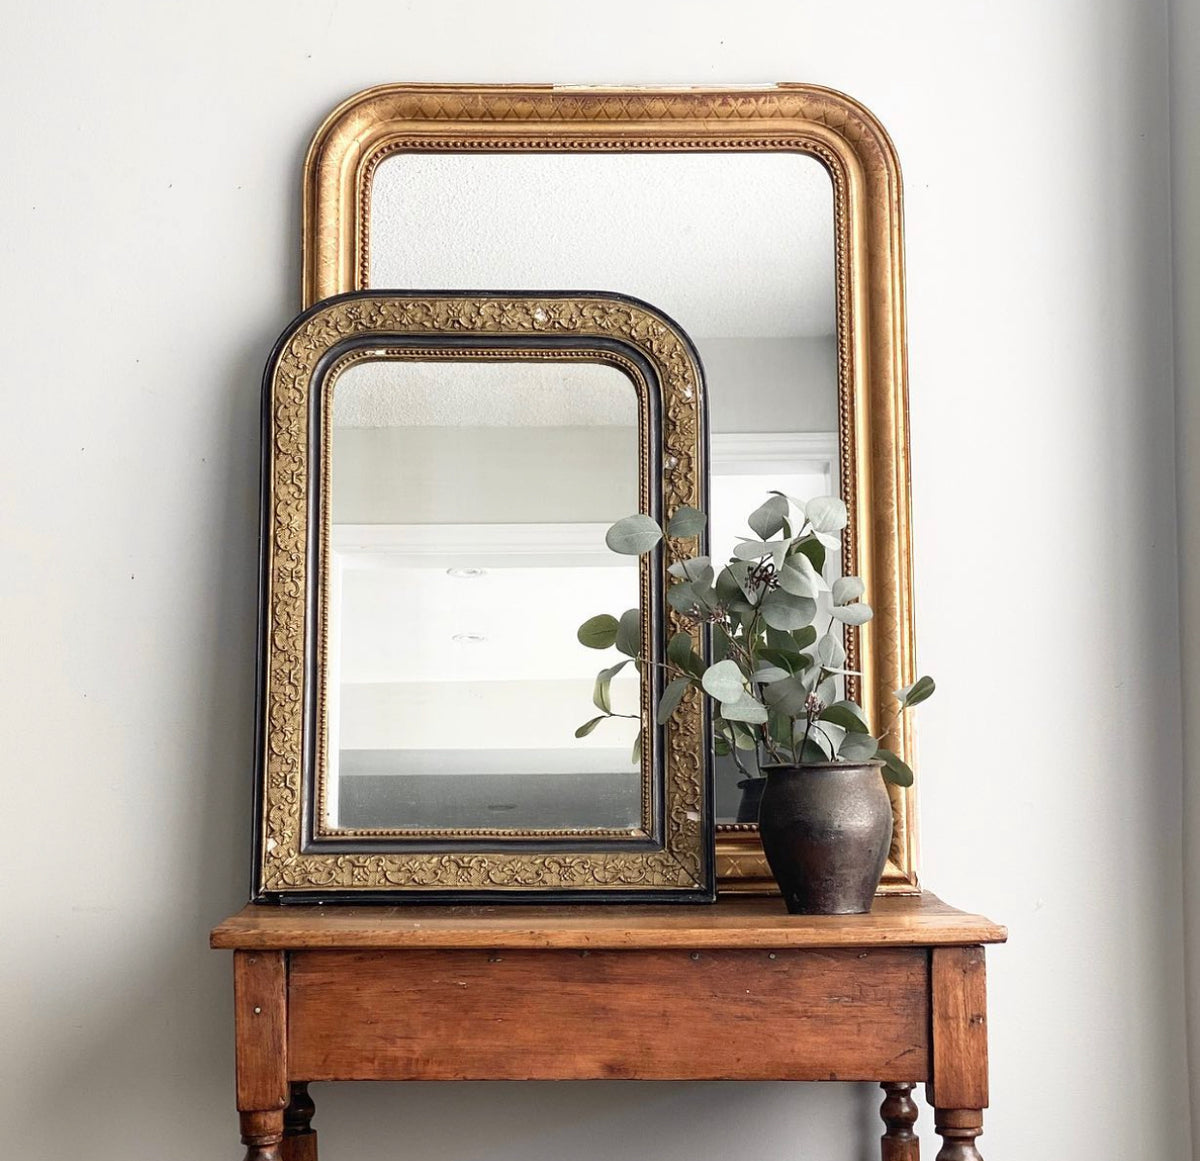 A gleaming 19th century Louis Philippe gilt mirror - Antiques from France